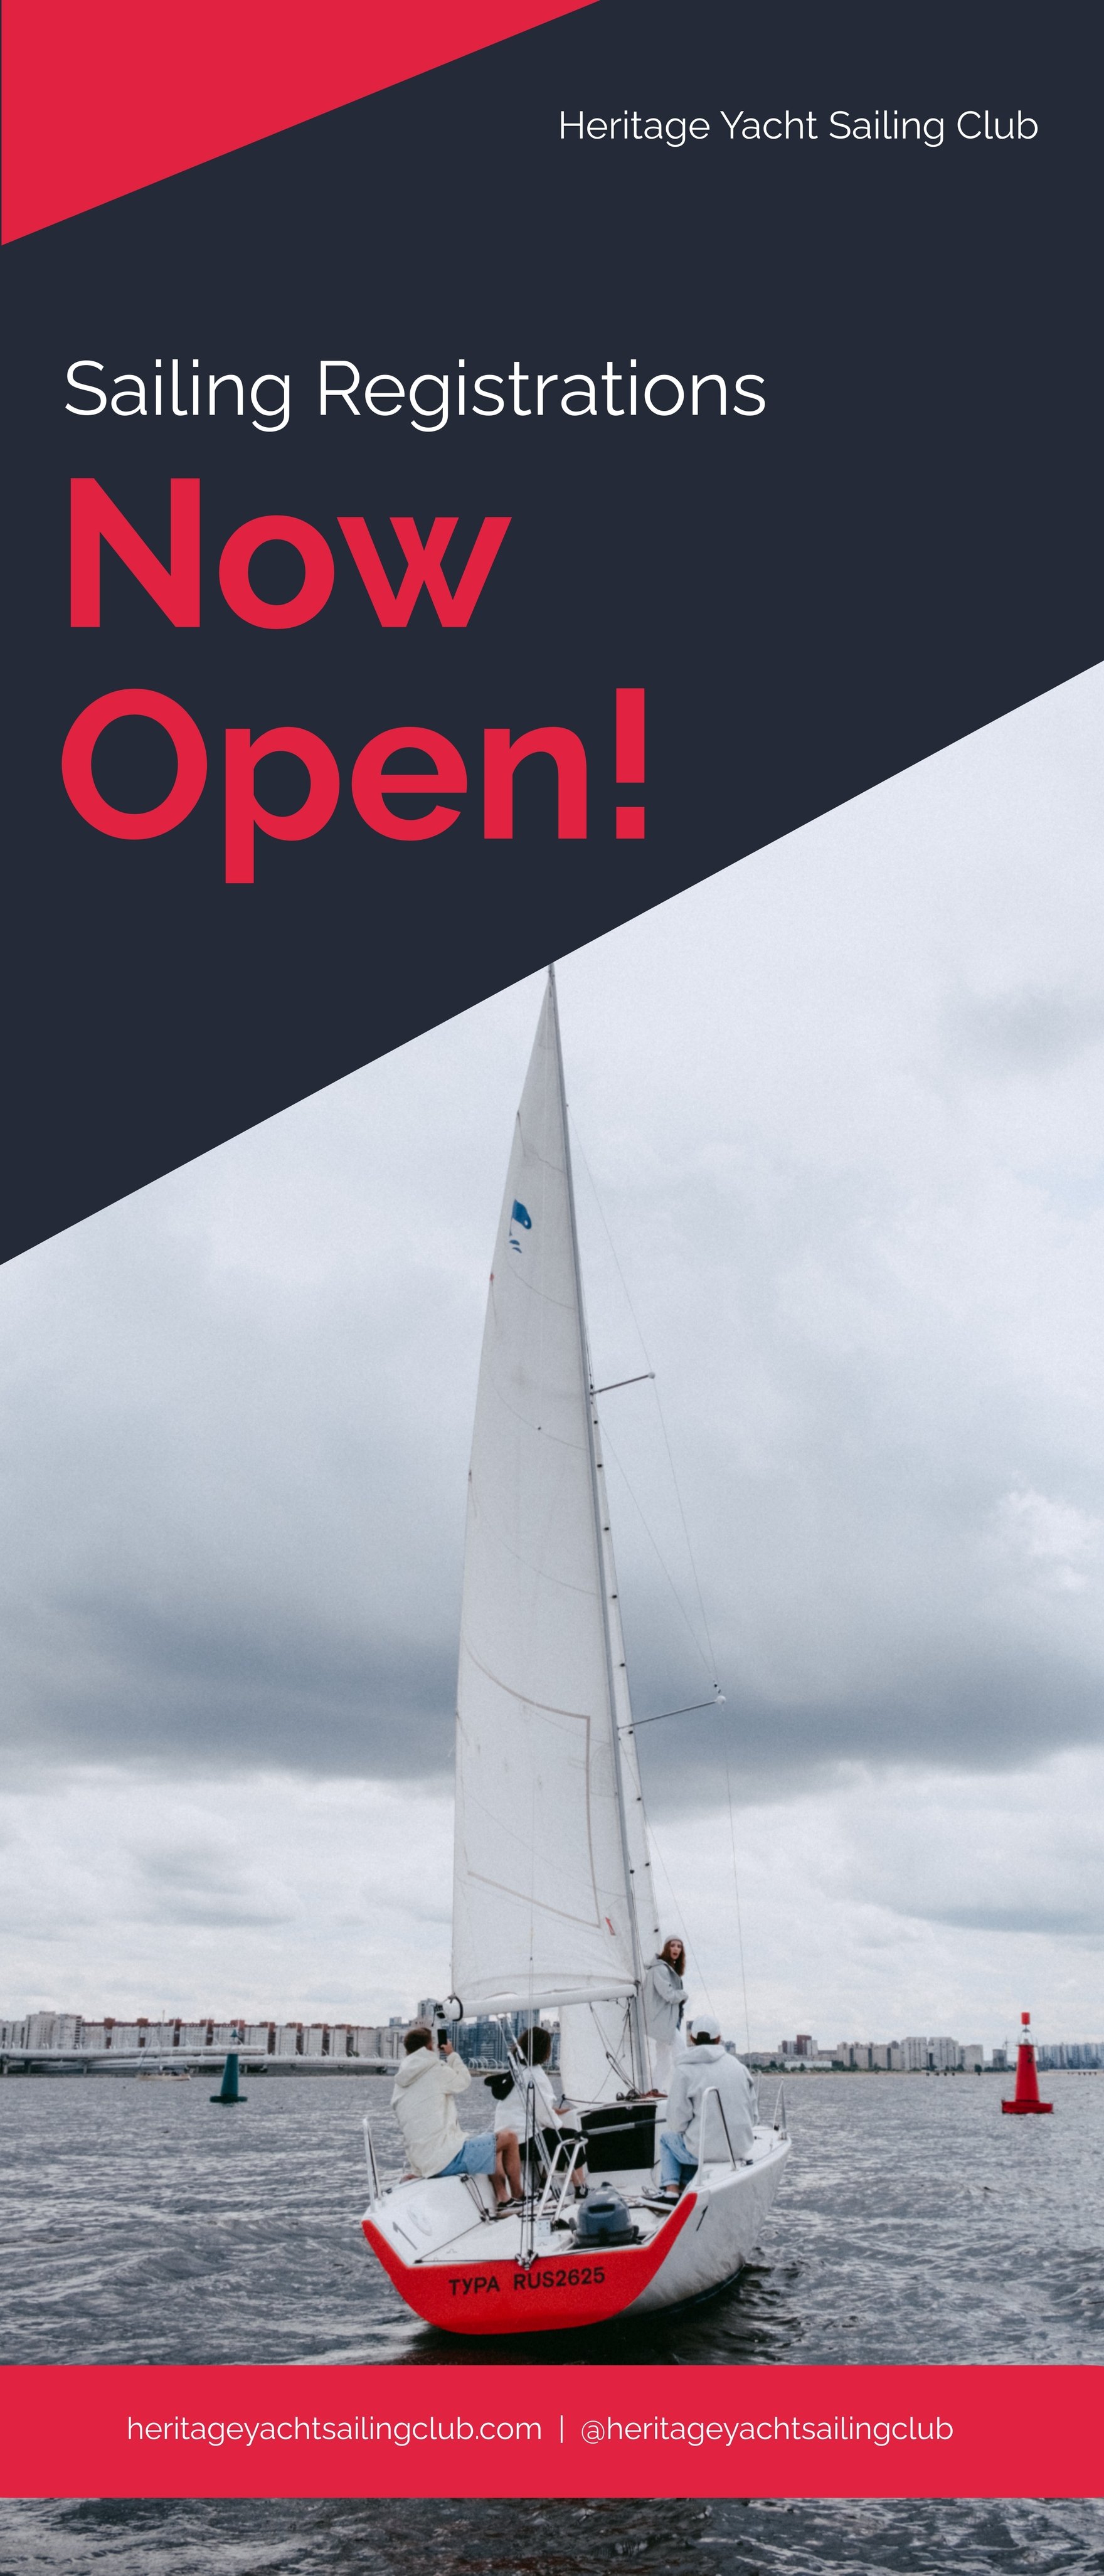 Yacht Sailing Club Rollup Banner Template in Word, Google Docs, Publisher